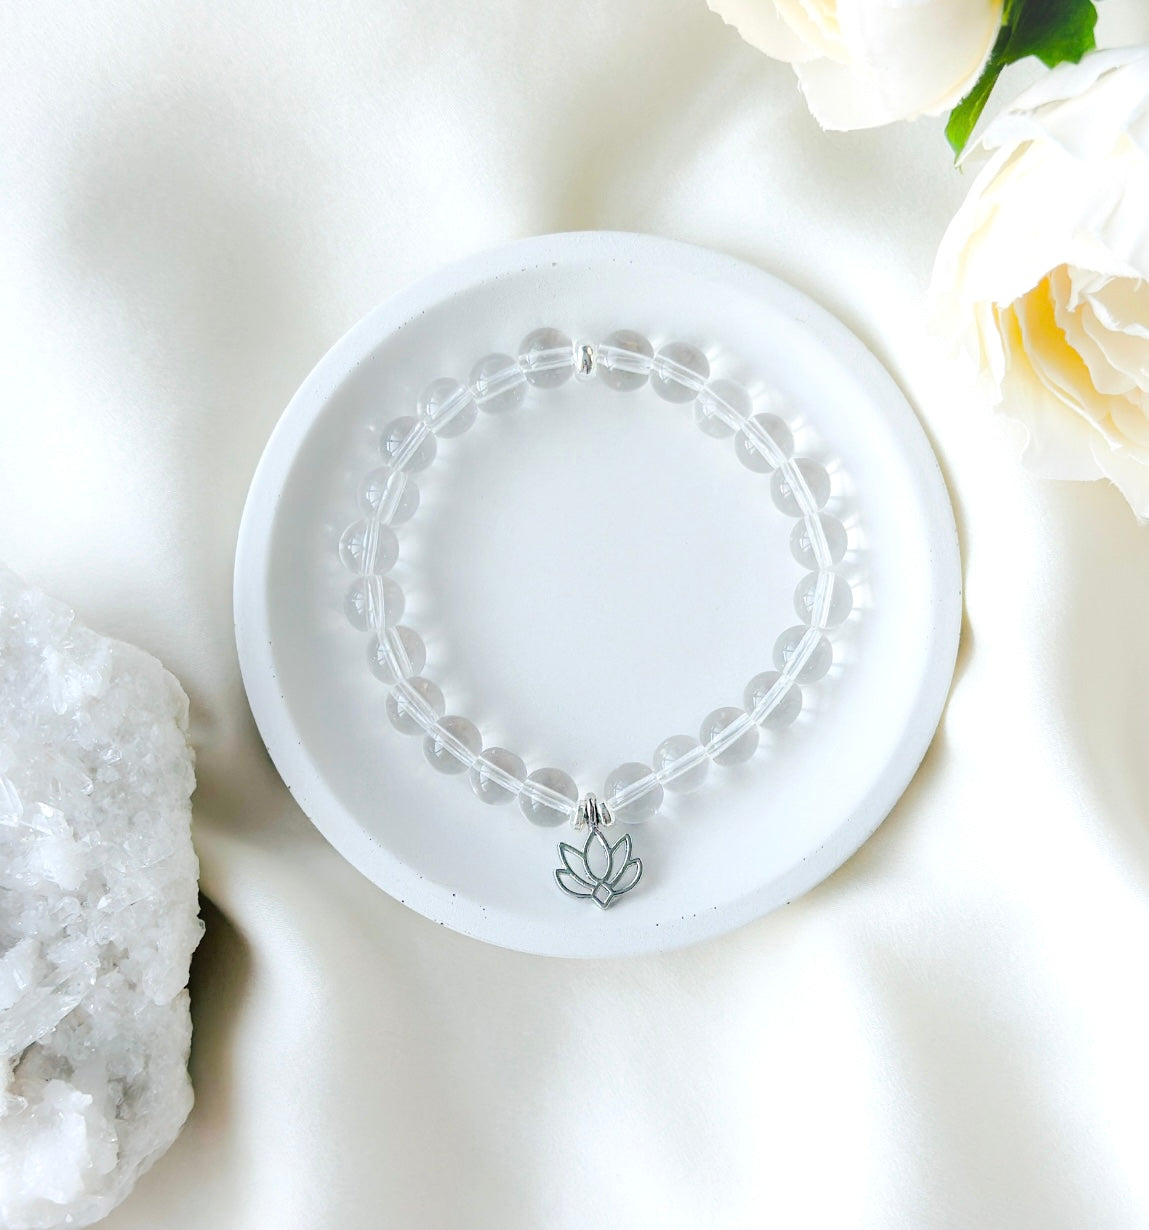  the "Luminescent Lotus Bracelet," a sublime fusion of Clear Quartz and a Lotus charm, 